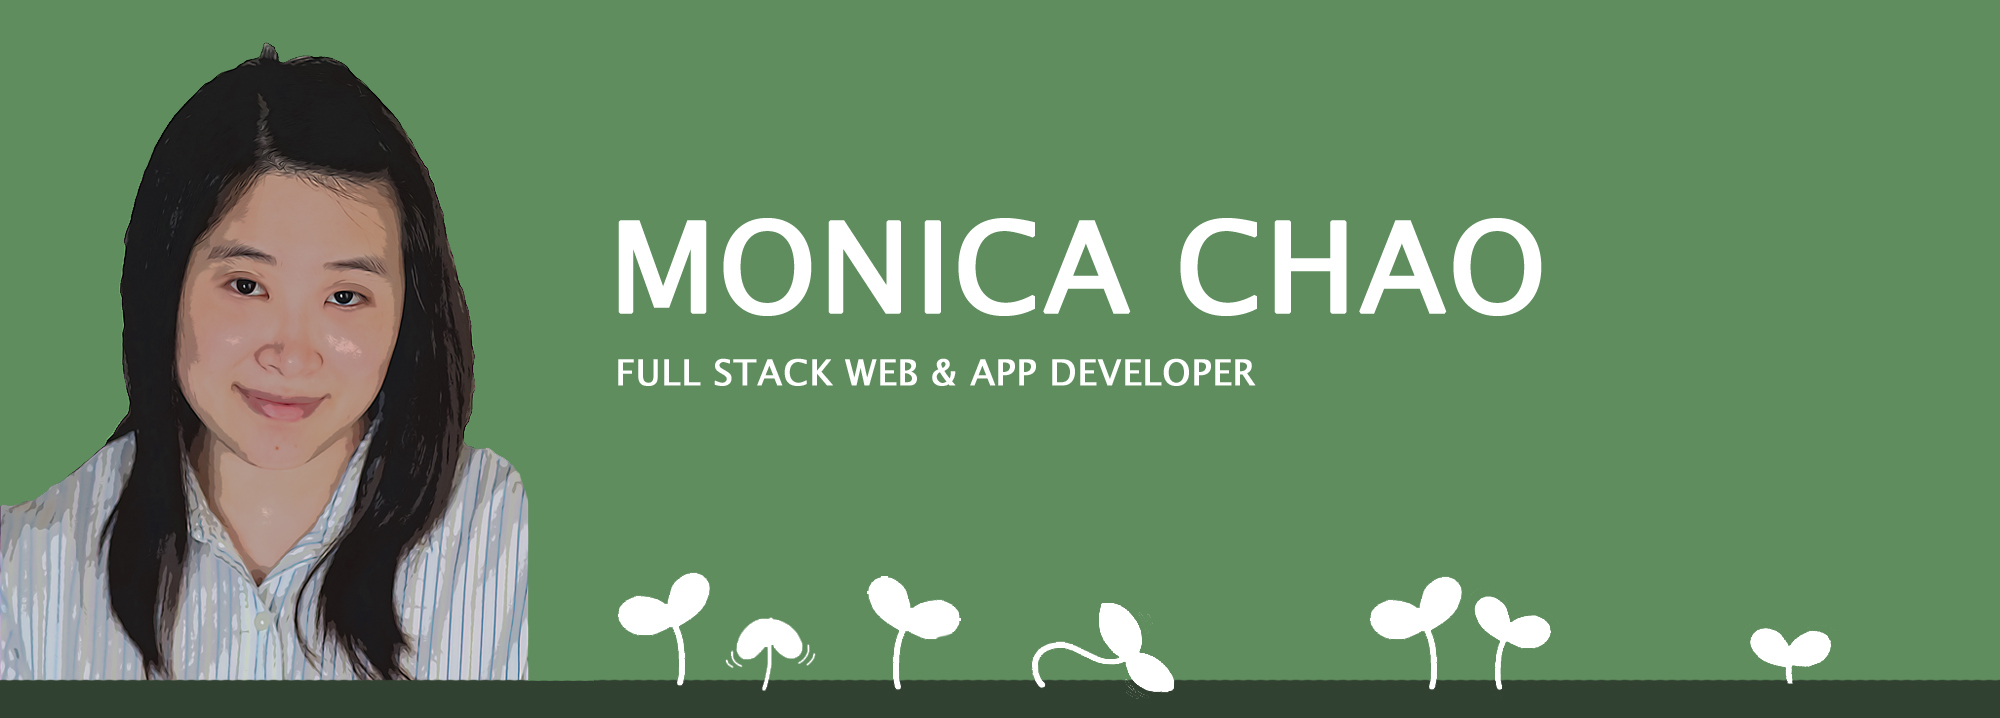 Banner about Monica Chao